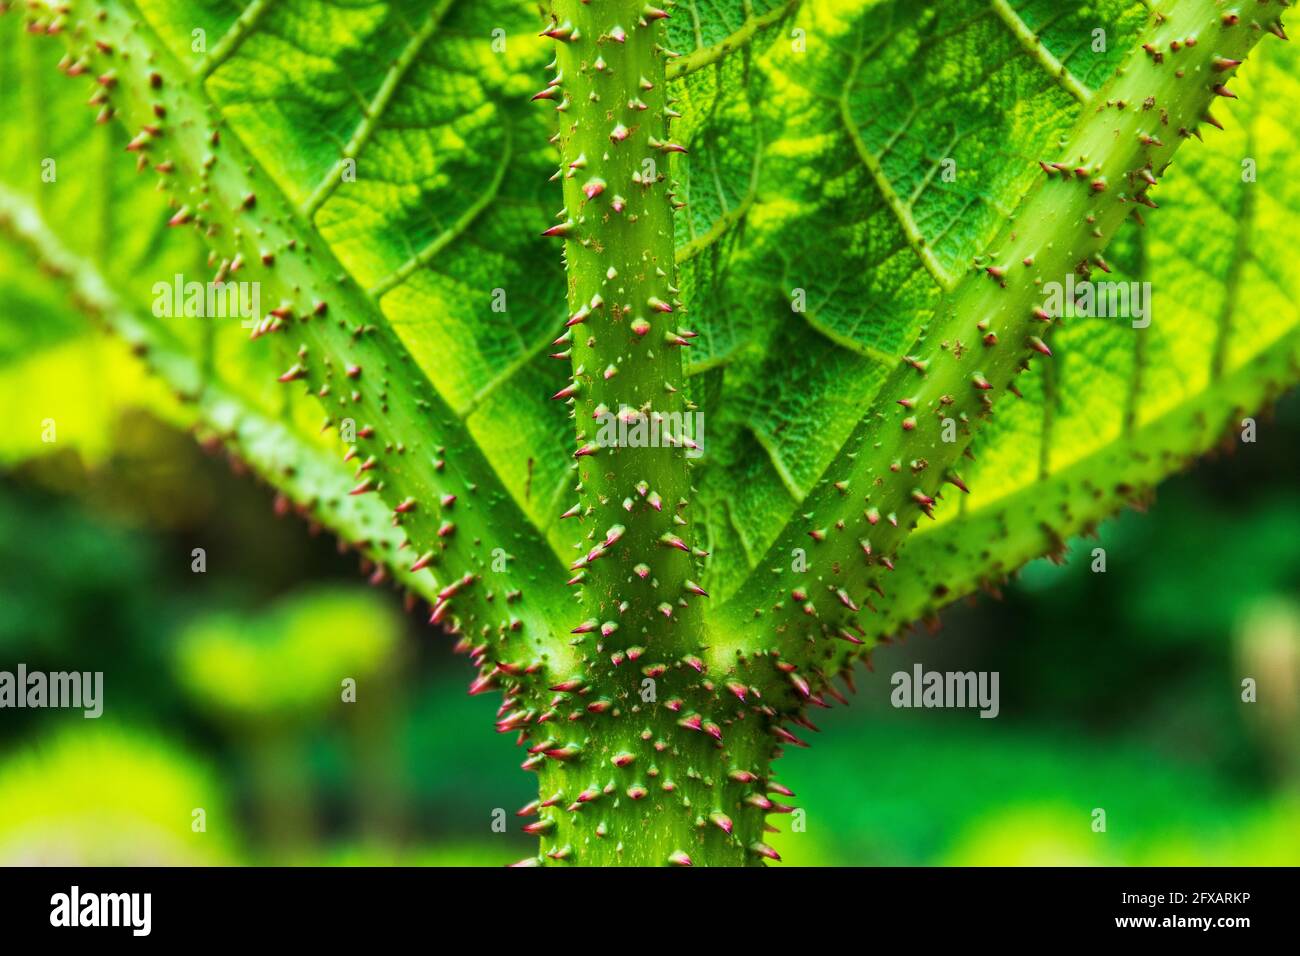 Leaf detail of Gunnera manicata, known as Brazilian giant-rhubarb native to South America from Colombia to Brazil,. It is a species of flowering plant Stock Photo